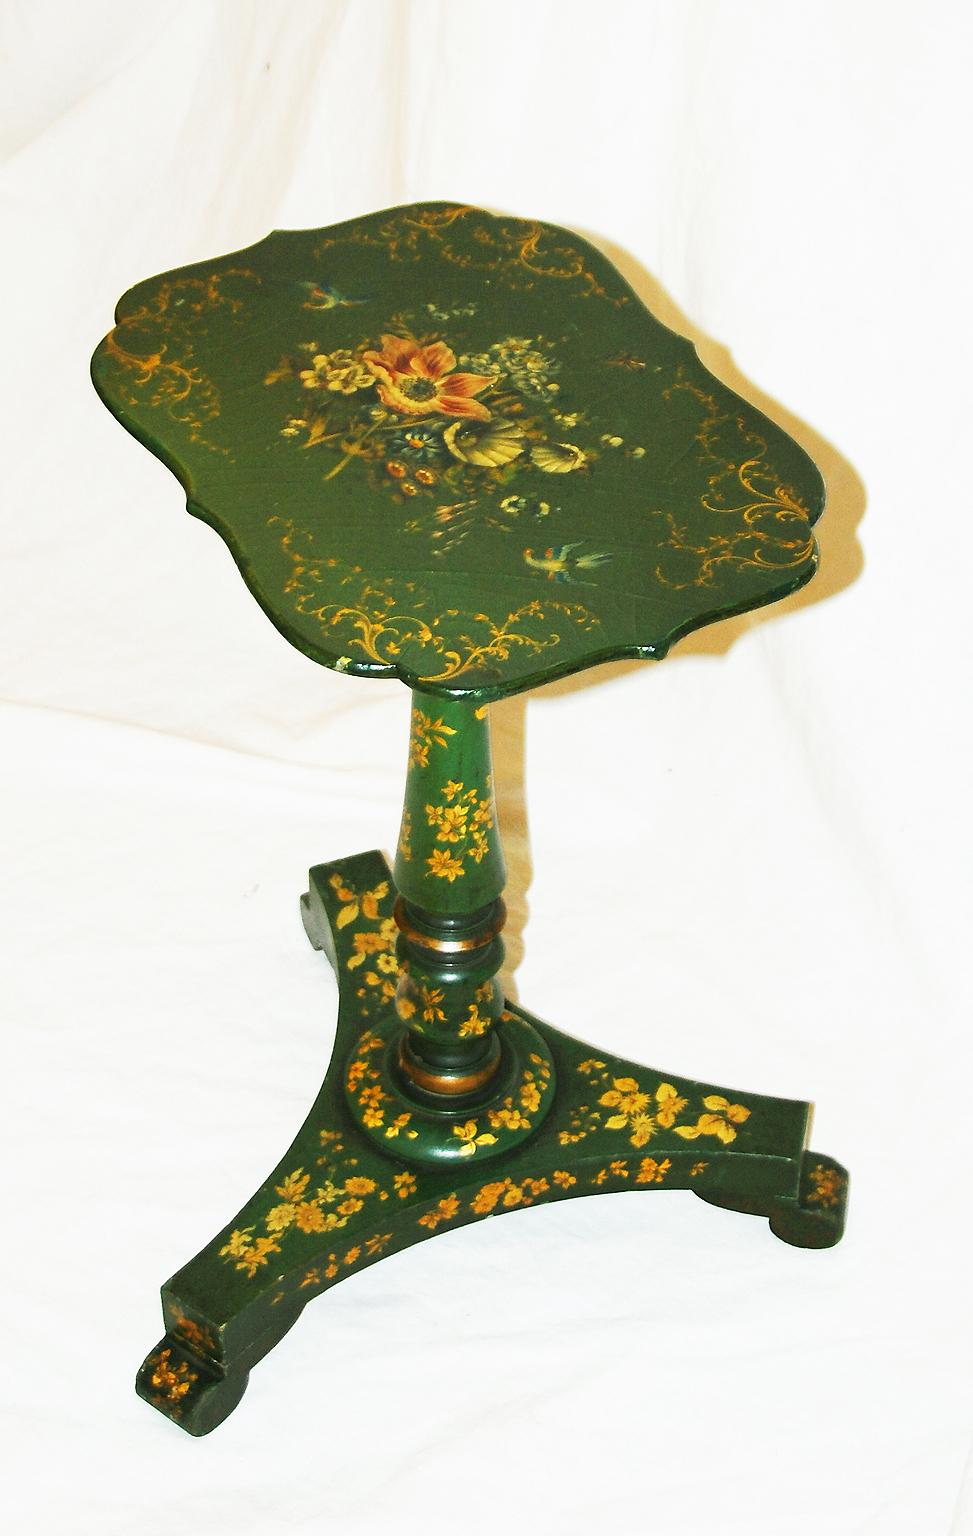 English Regency period hand painted pedestal side table. This side table was formerly a pole screen, the pole was eliminated and the screen was attached to the top of the pedestal, making a handsome diminutive side table. The delicate gold tracery